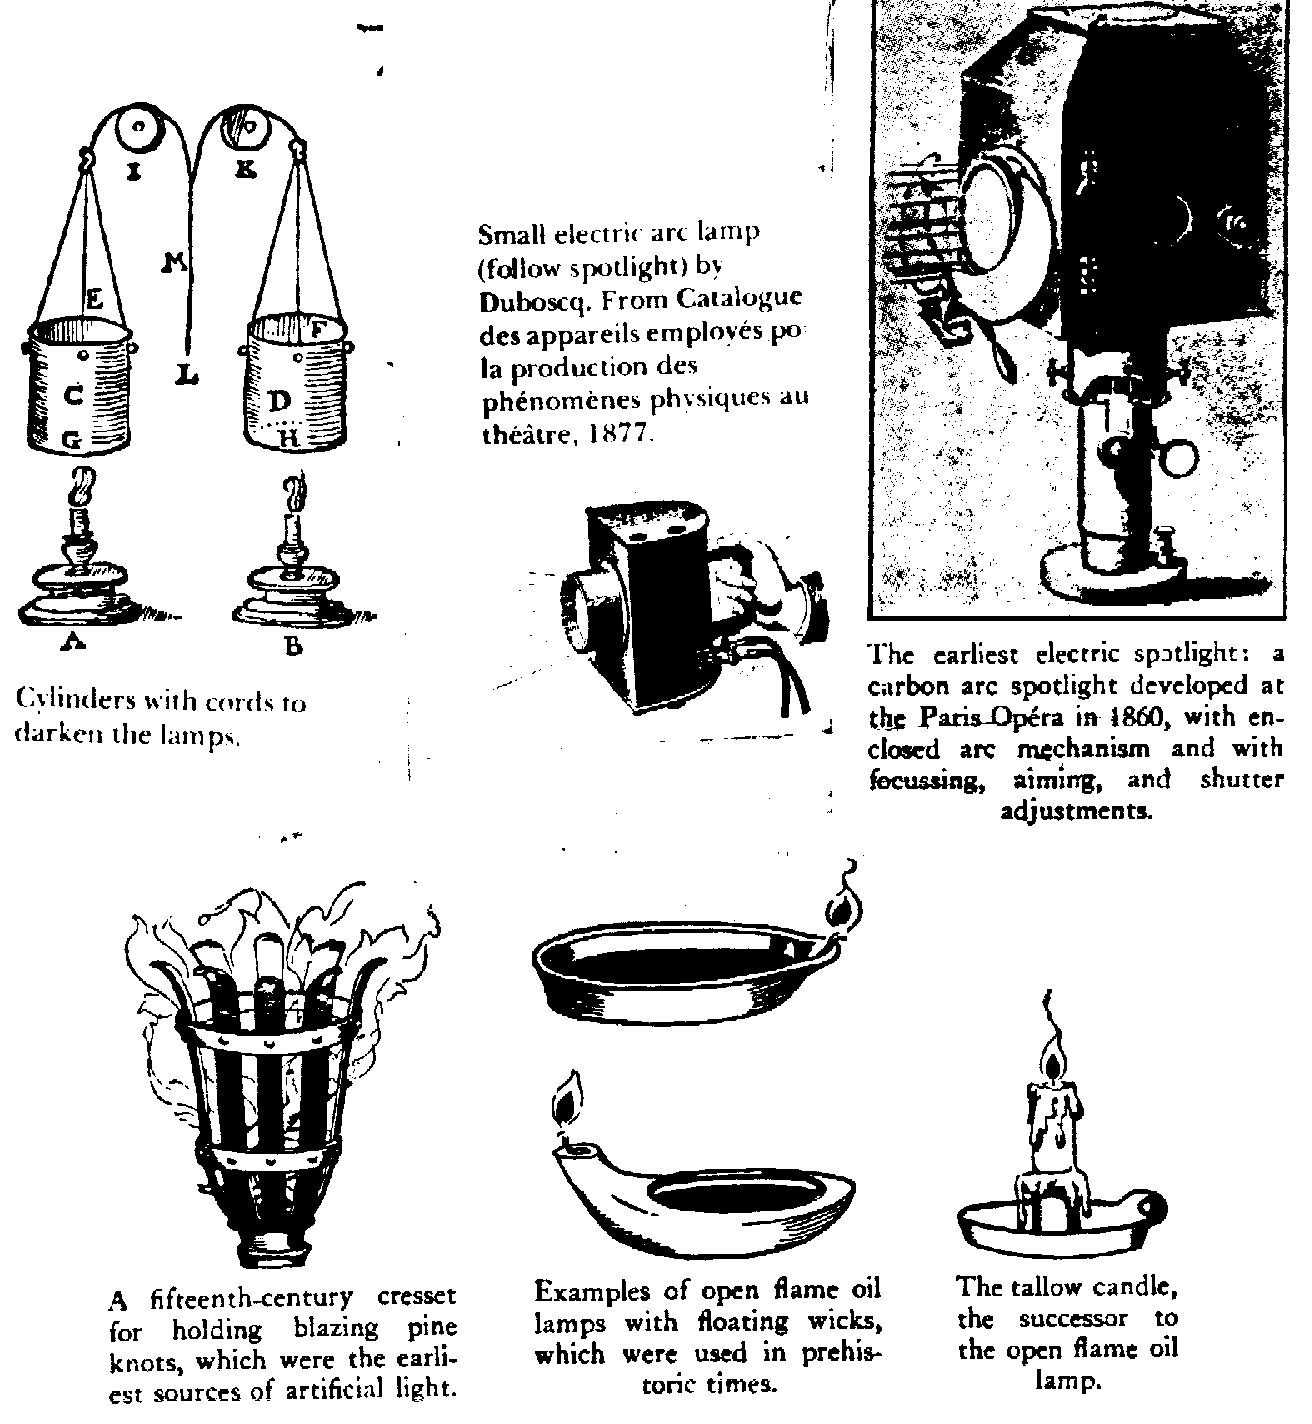 Images of early lighting instruments.